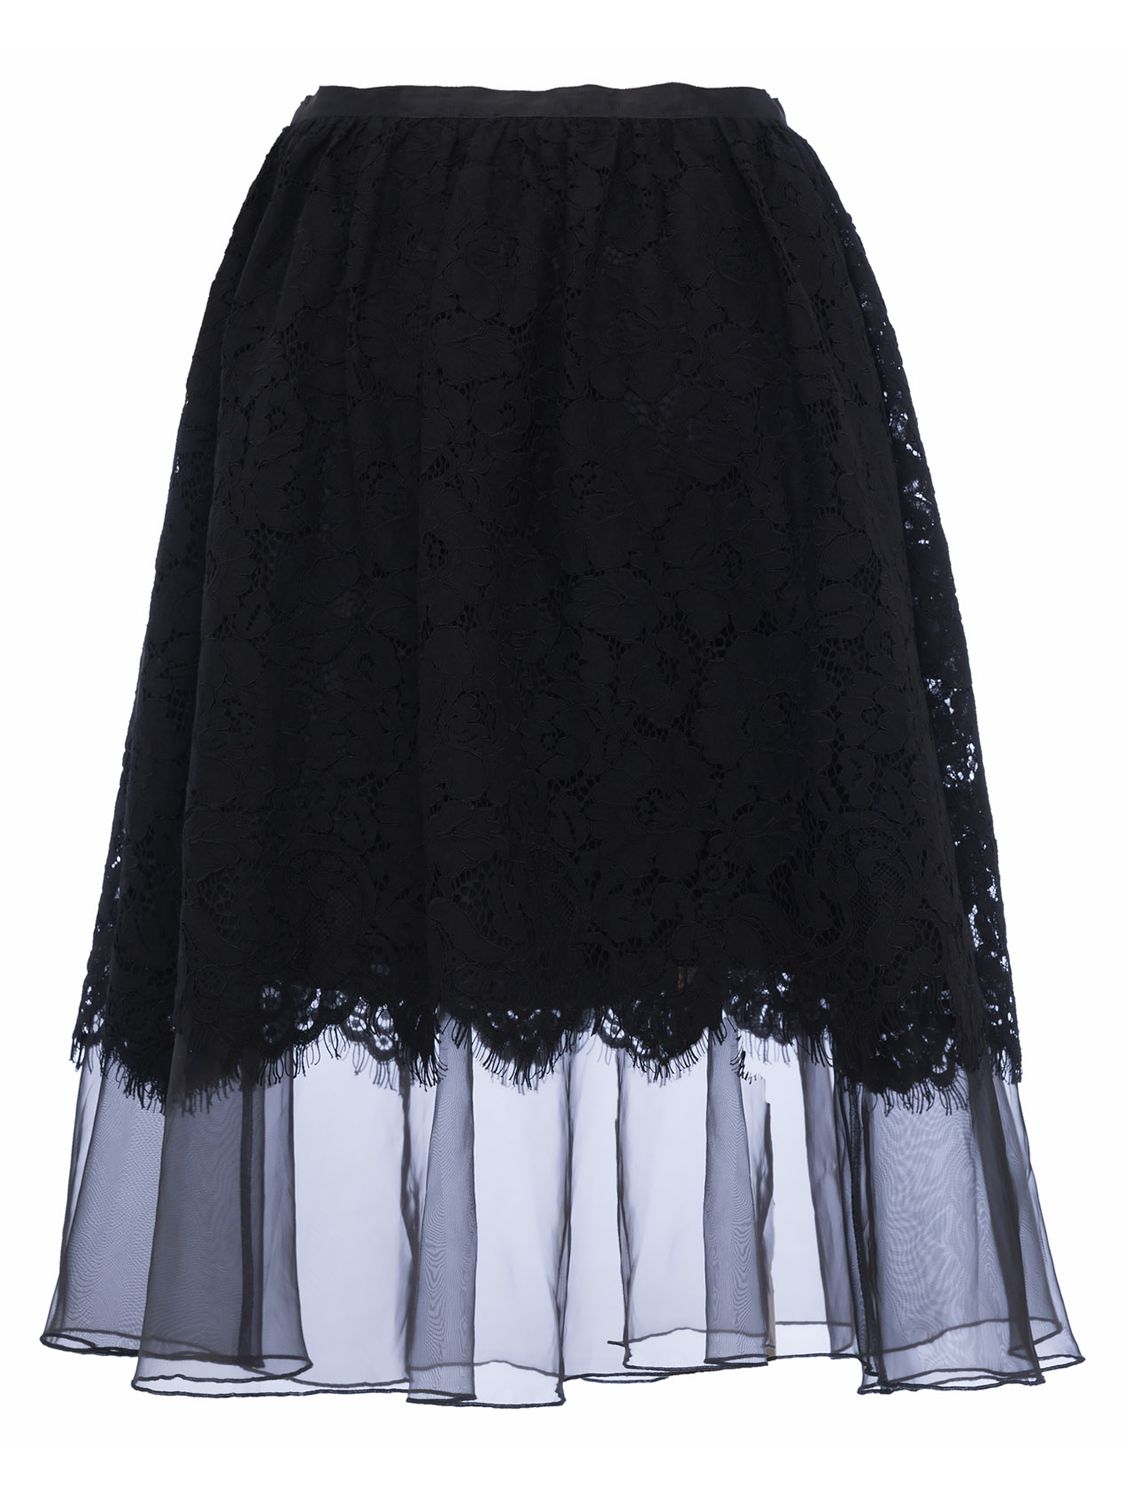 French Connection Spotlight Lace Flared Skirt, Black